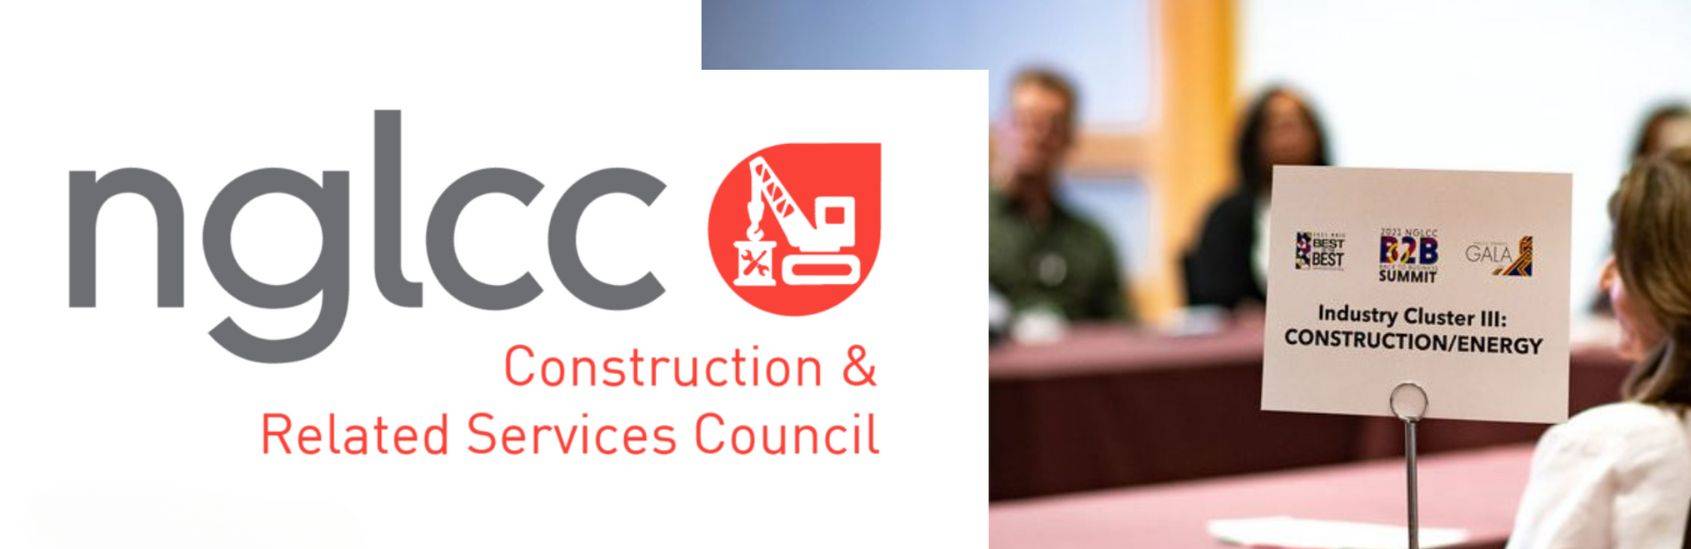 NGLCC CONSTRUCTION & RELATED SERVICES COUNCIL